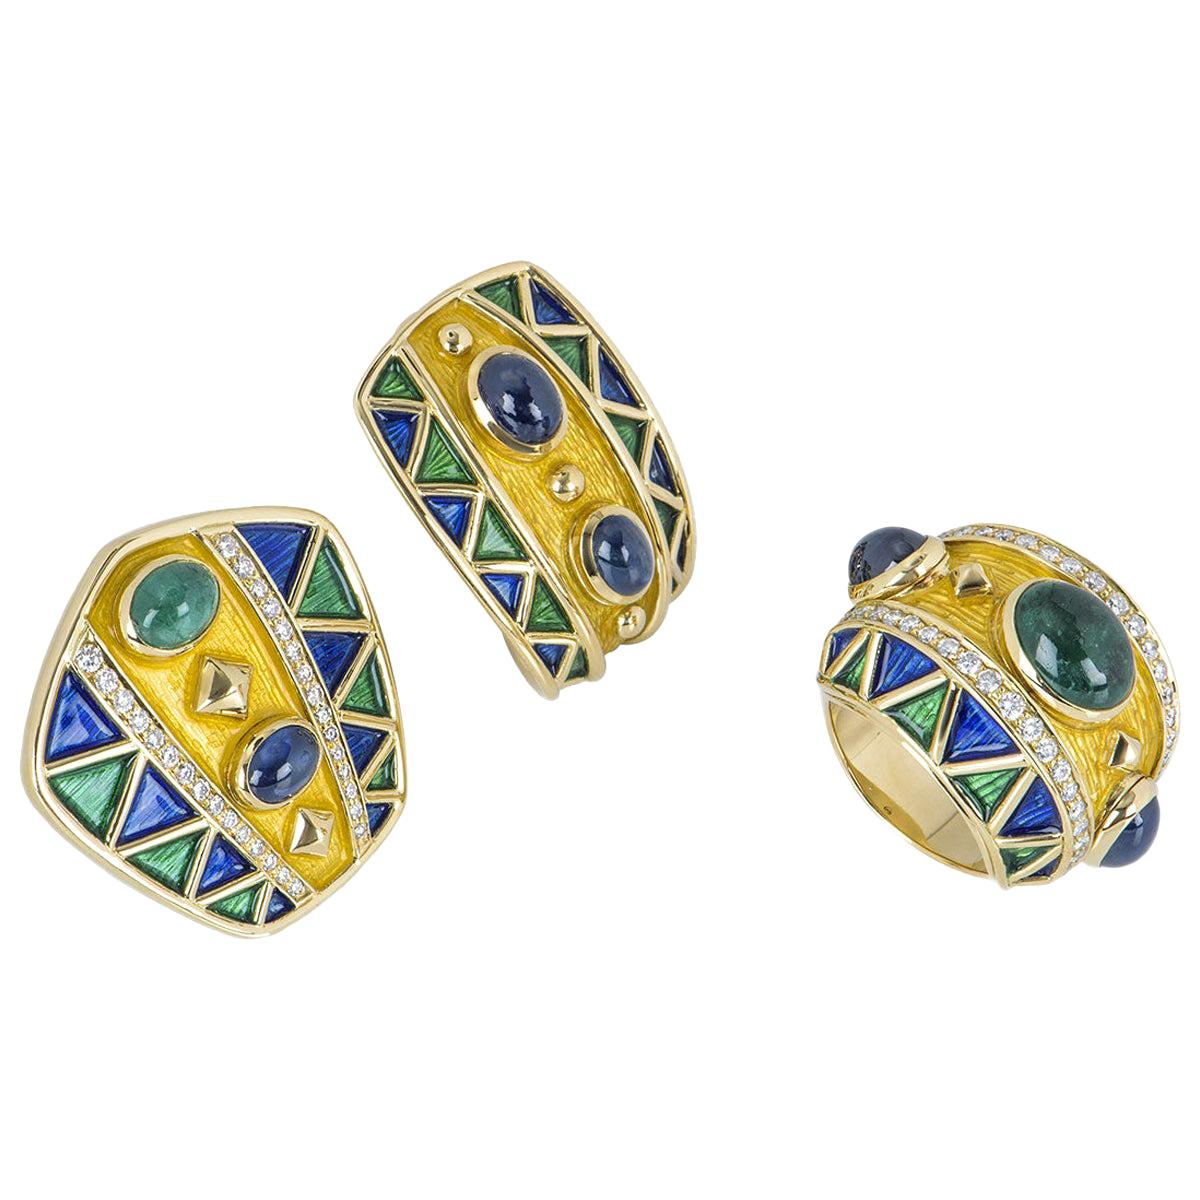 Diamond and Multi-Gem, Emerald and Sapphire Earrings and Ring Set